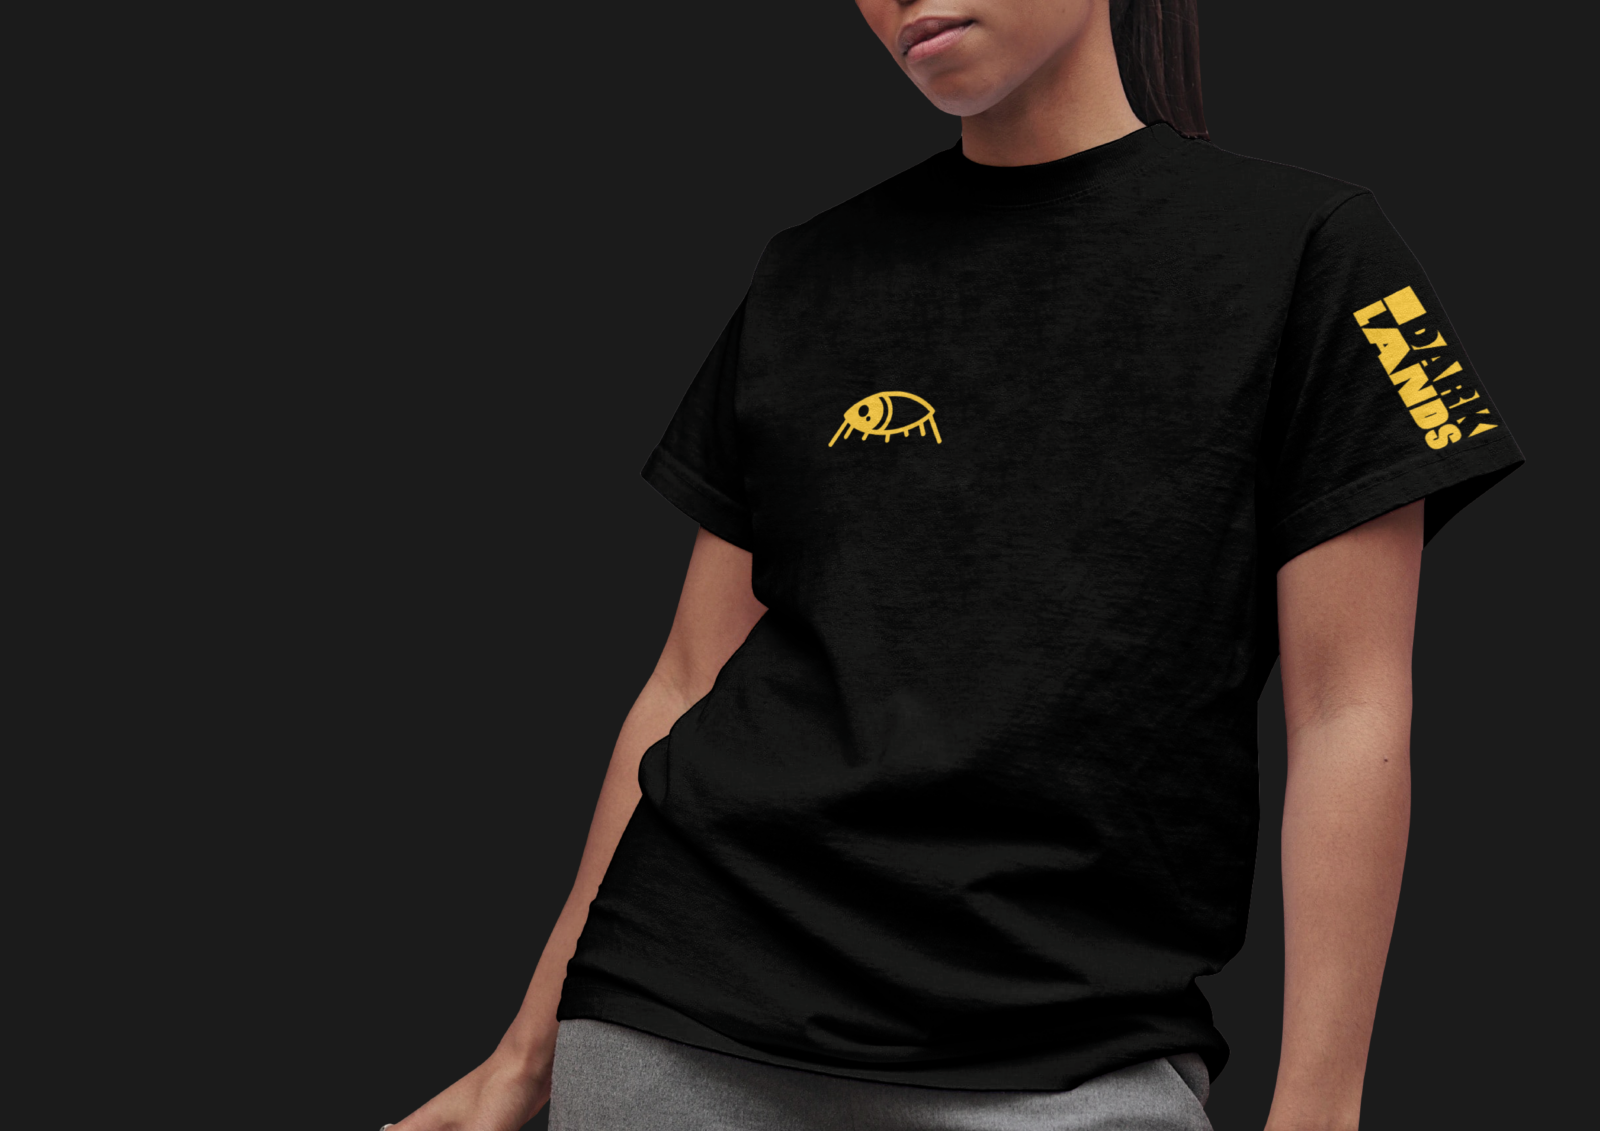 Black festival shirt with yellow graphics.